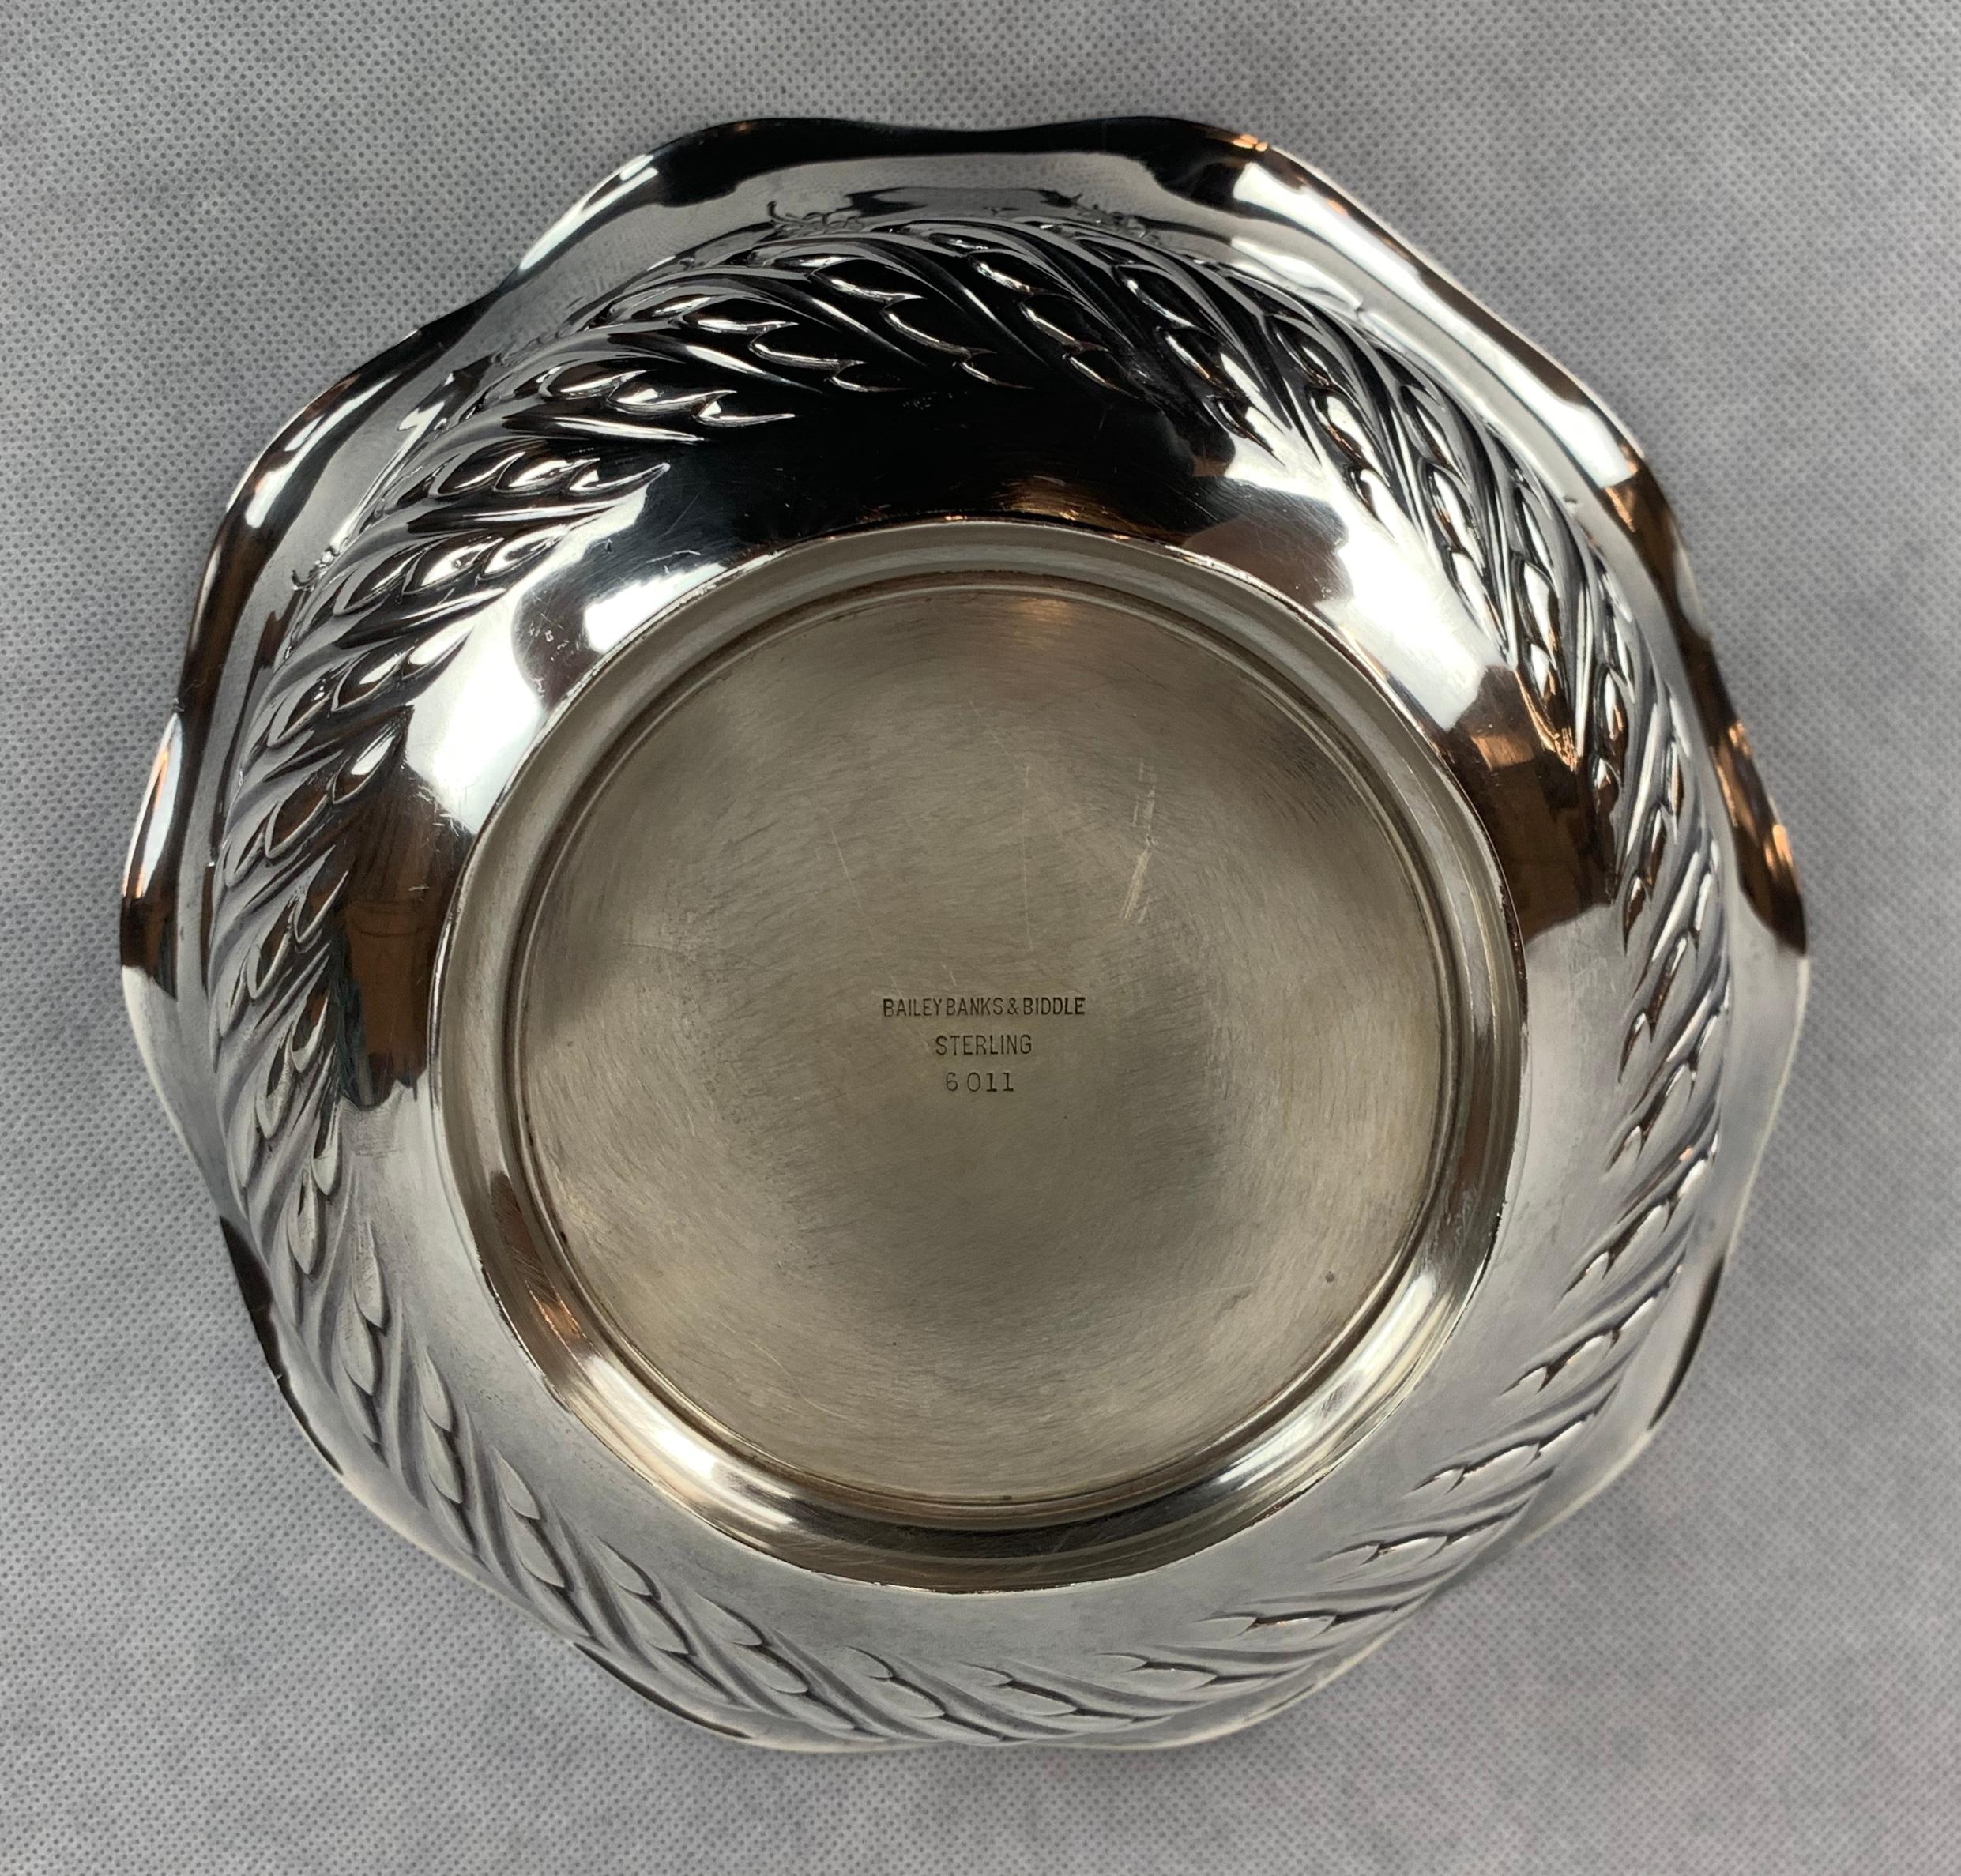 American Classical Bailey, Banks and Biddle Sterling Silver Repoussé Bowl-9.5